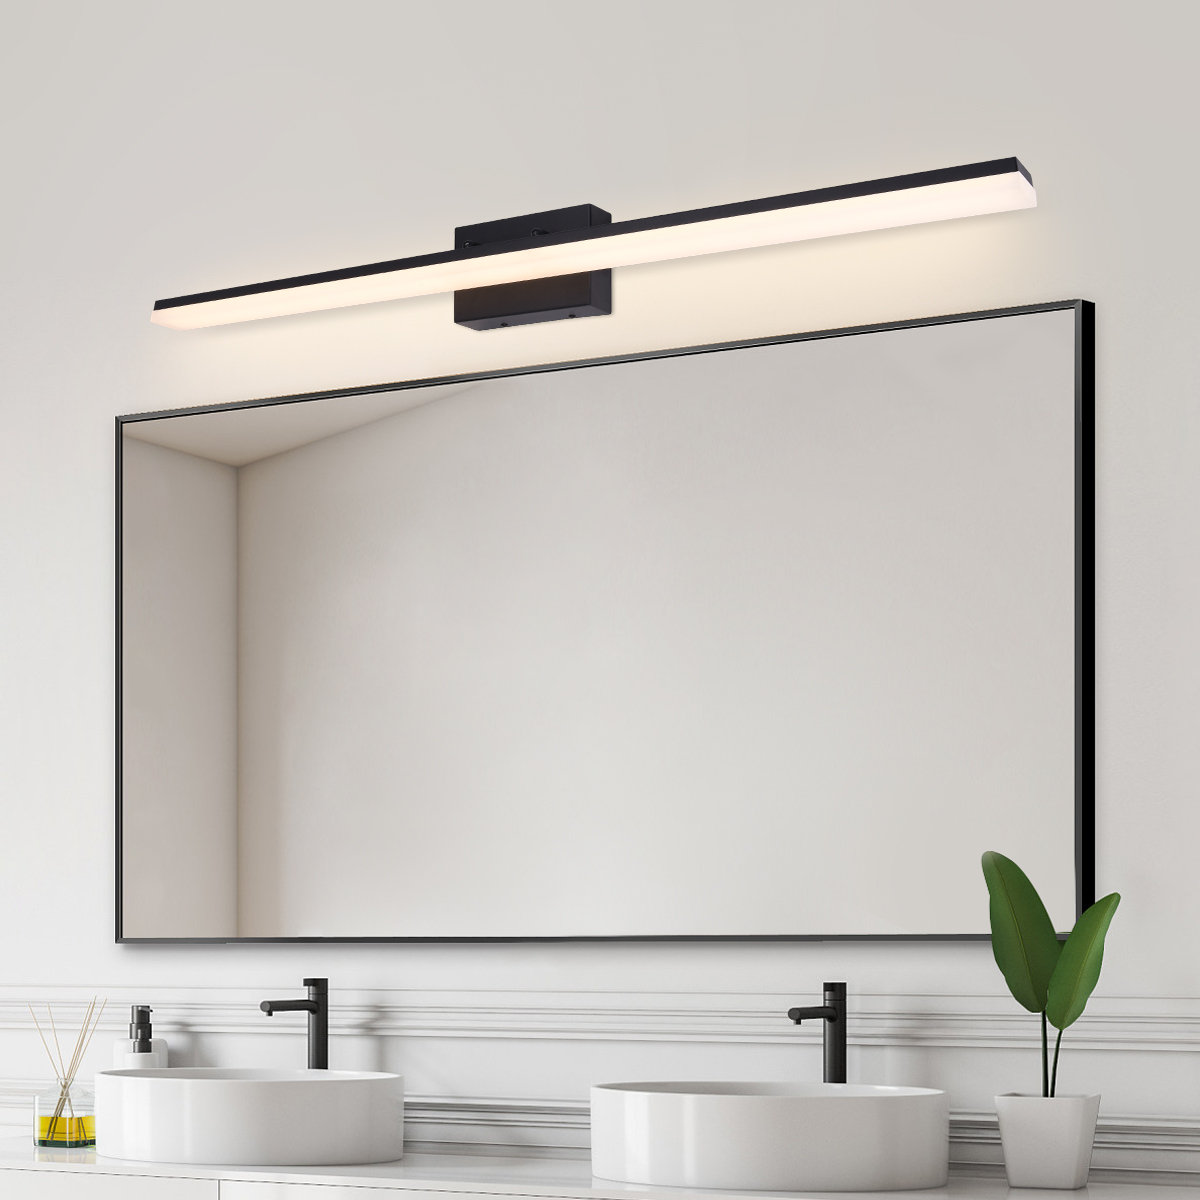 LED Lighting in the Bathroom - AlenaCDesign